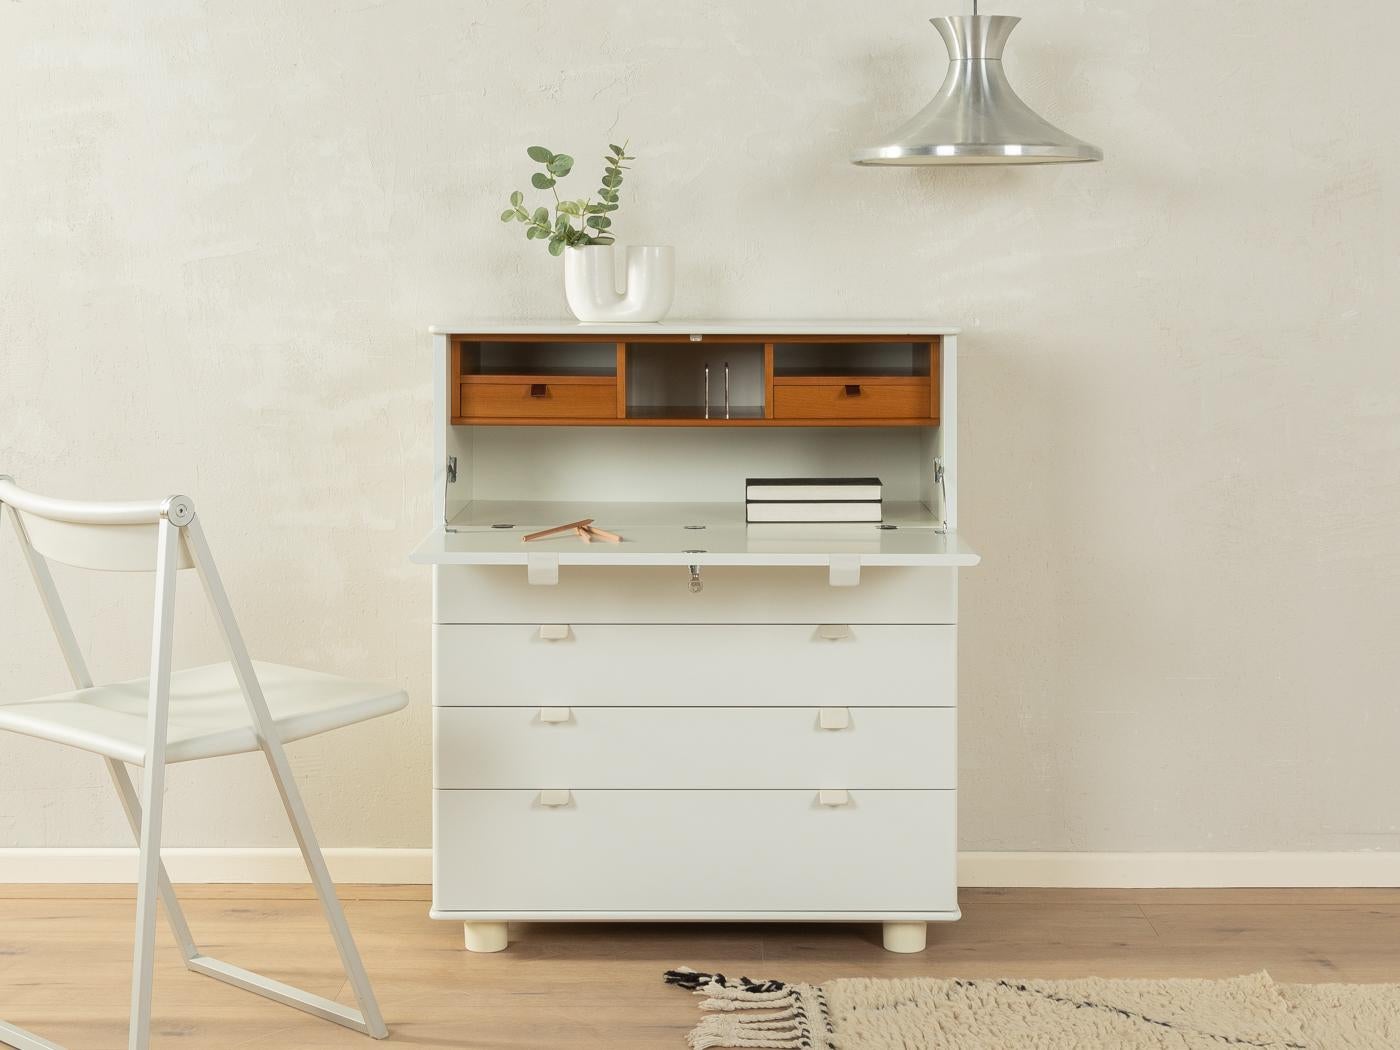 Wonderful bureau from the MUTARO line designed in 1979 by Peter Maly for interlübke. Corpus in white lacquered wood with four drawers, a hinged work surface, two internal drawers, a storage compartment and round plastic legs.

Quality Features:
   